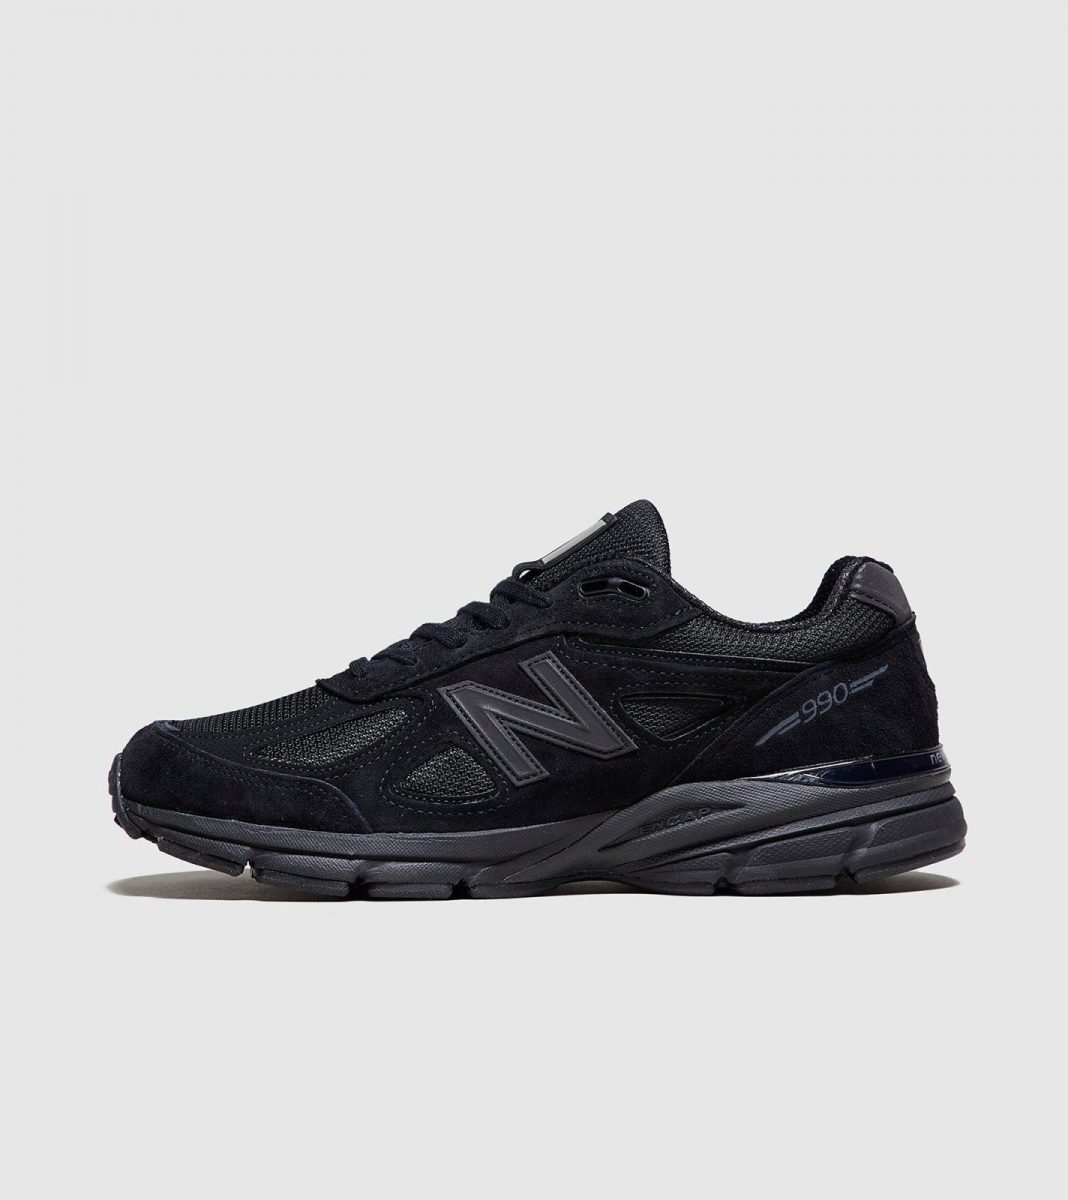 New Balance 990v4 - Made in the USA 